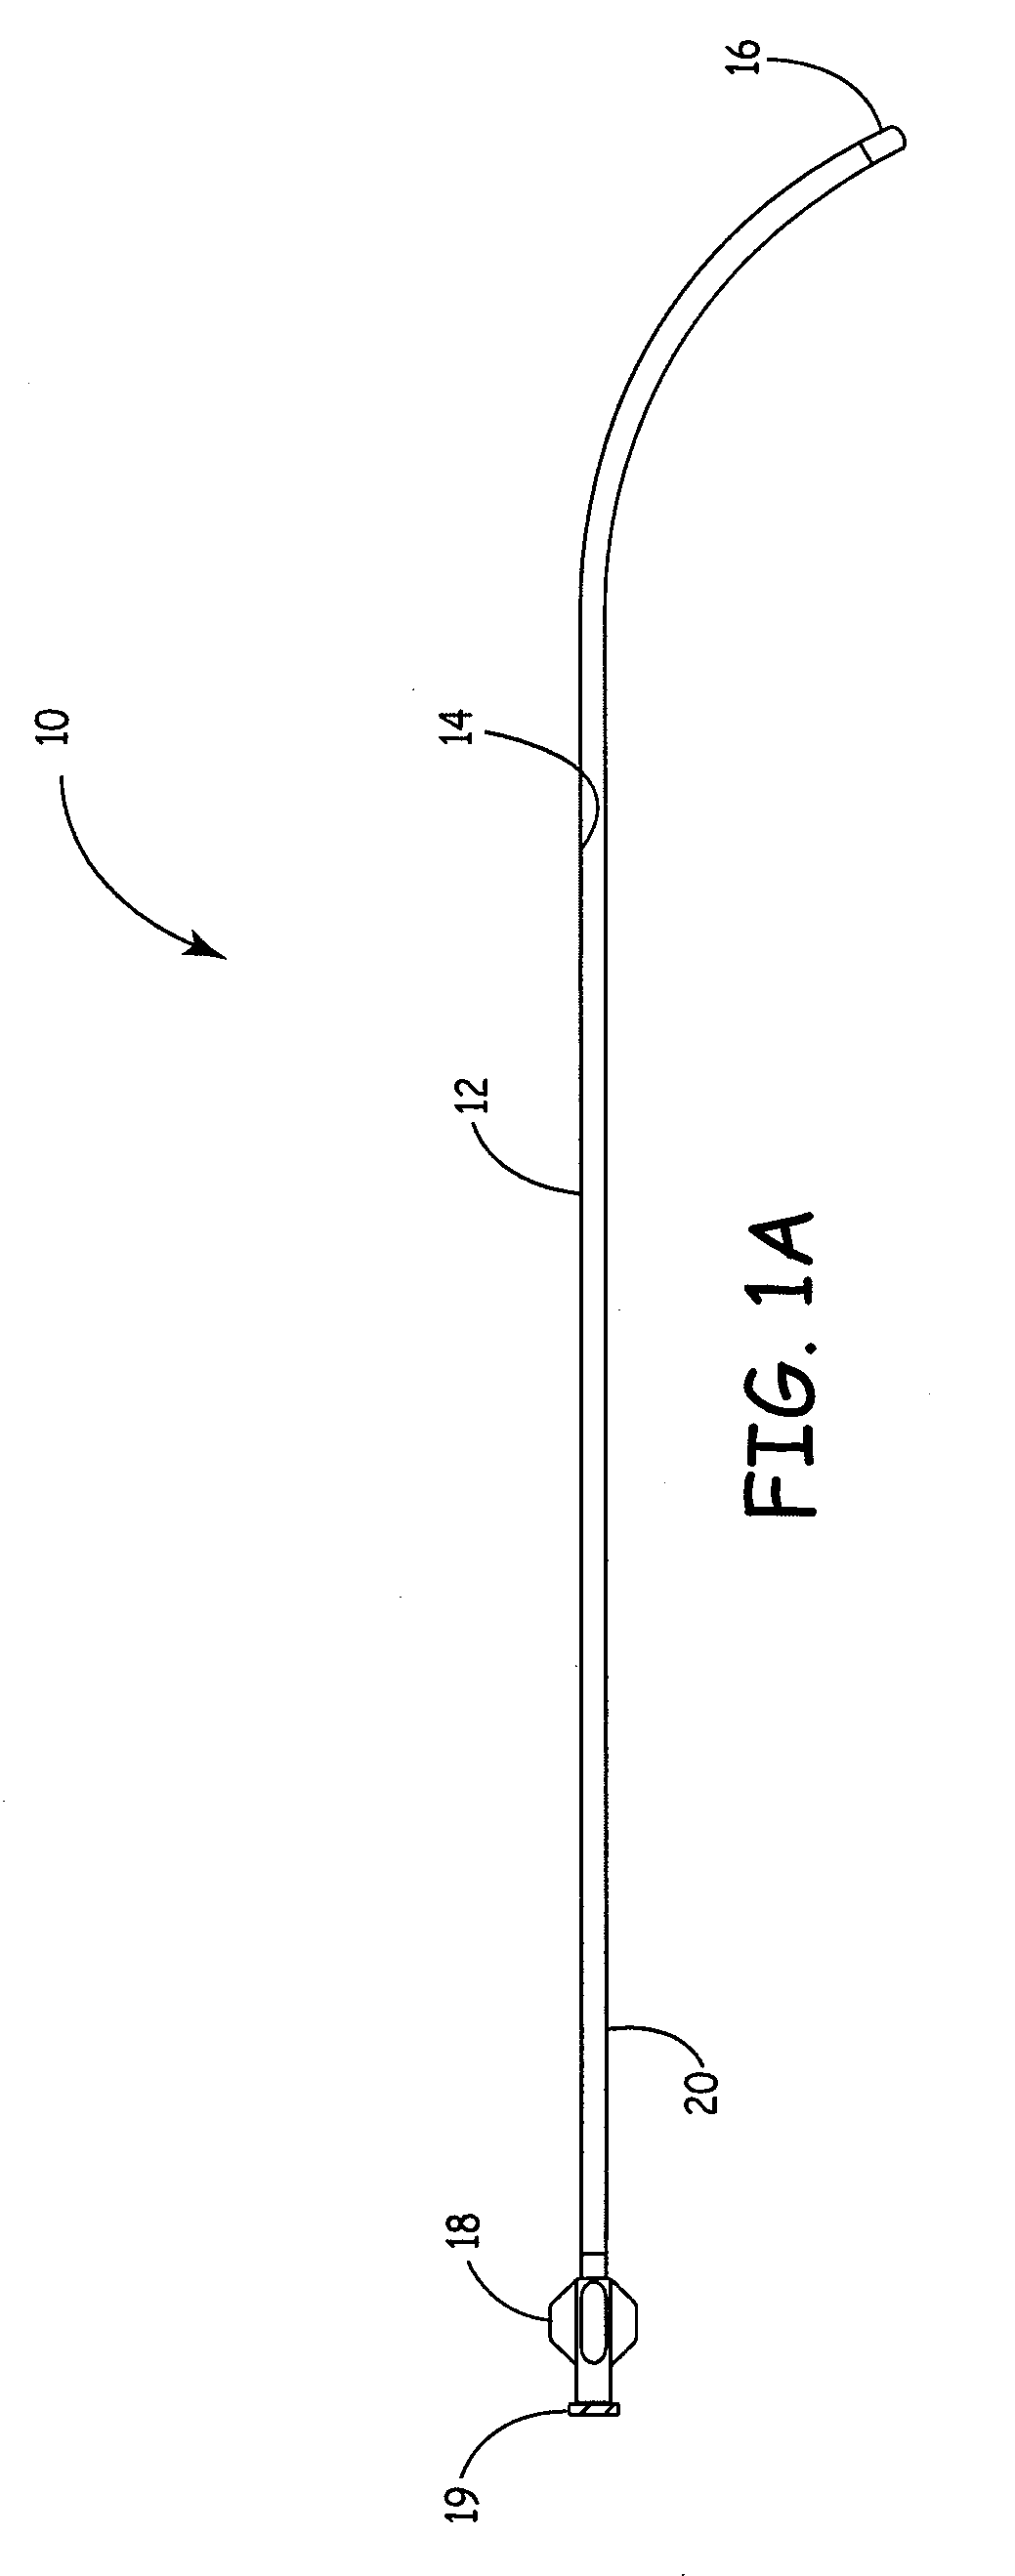 System and method for treating septal defects